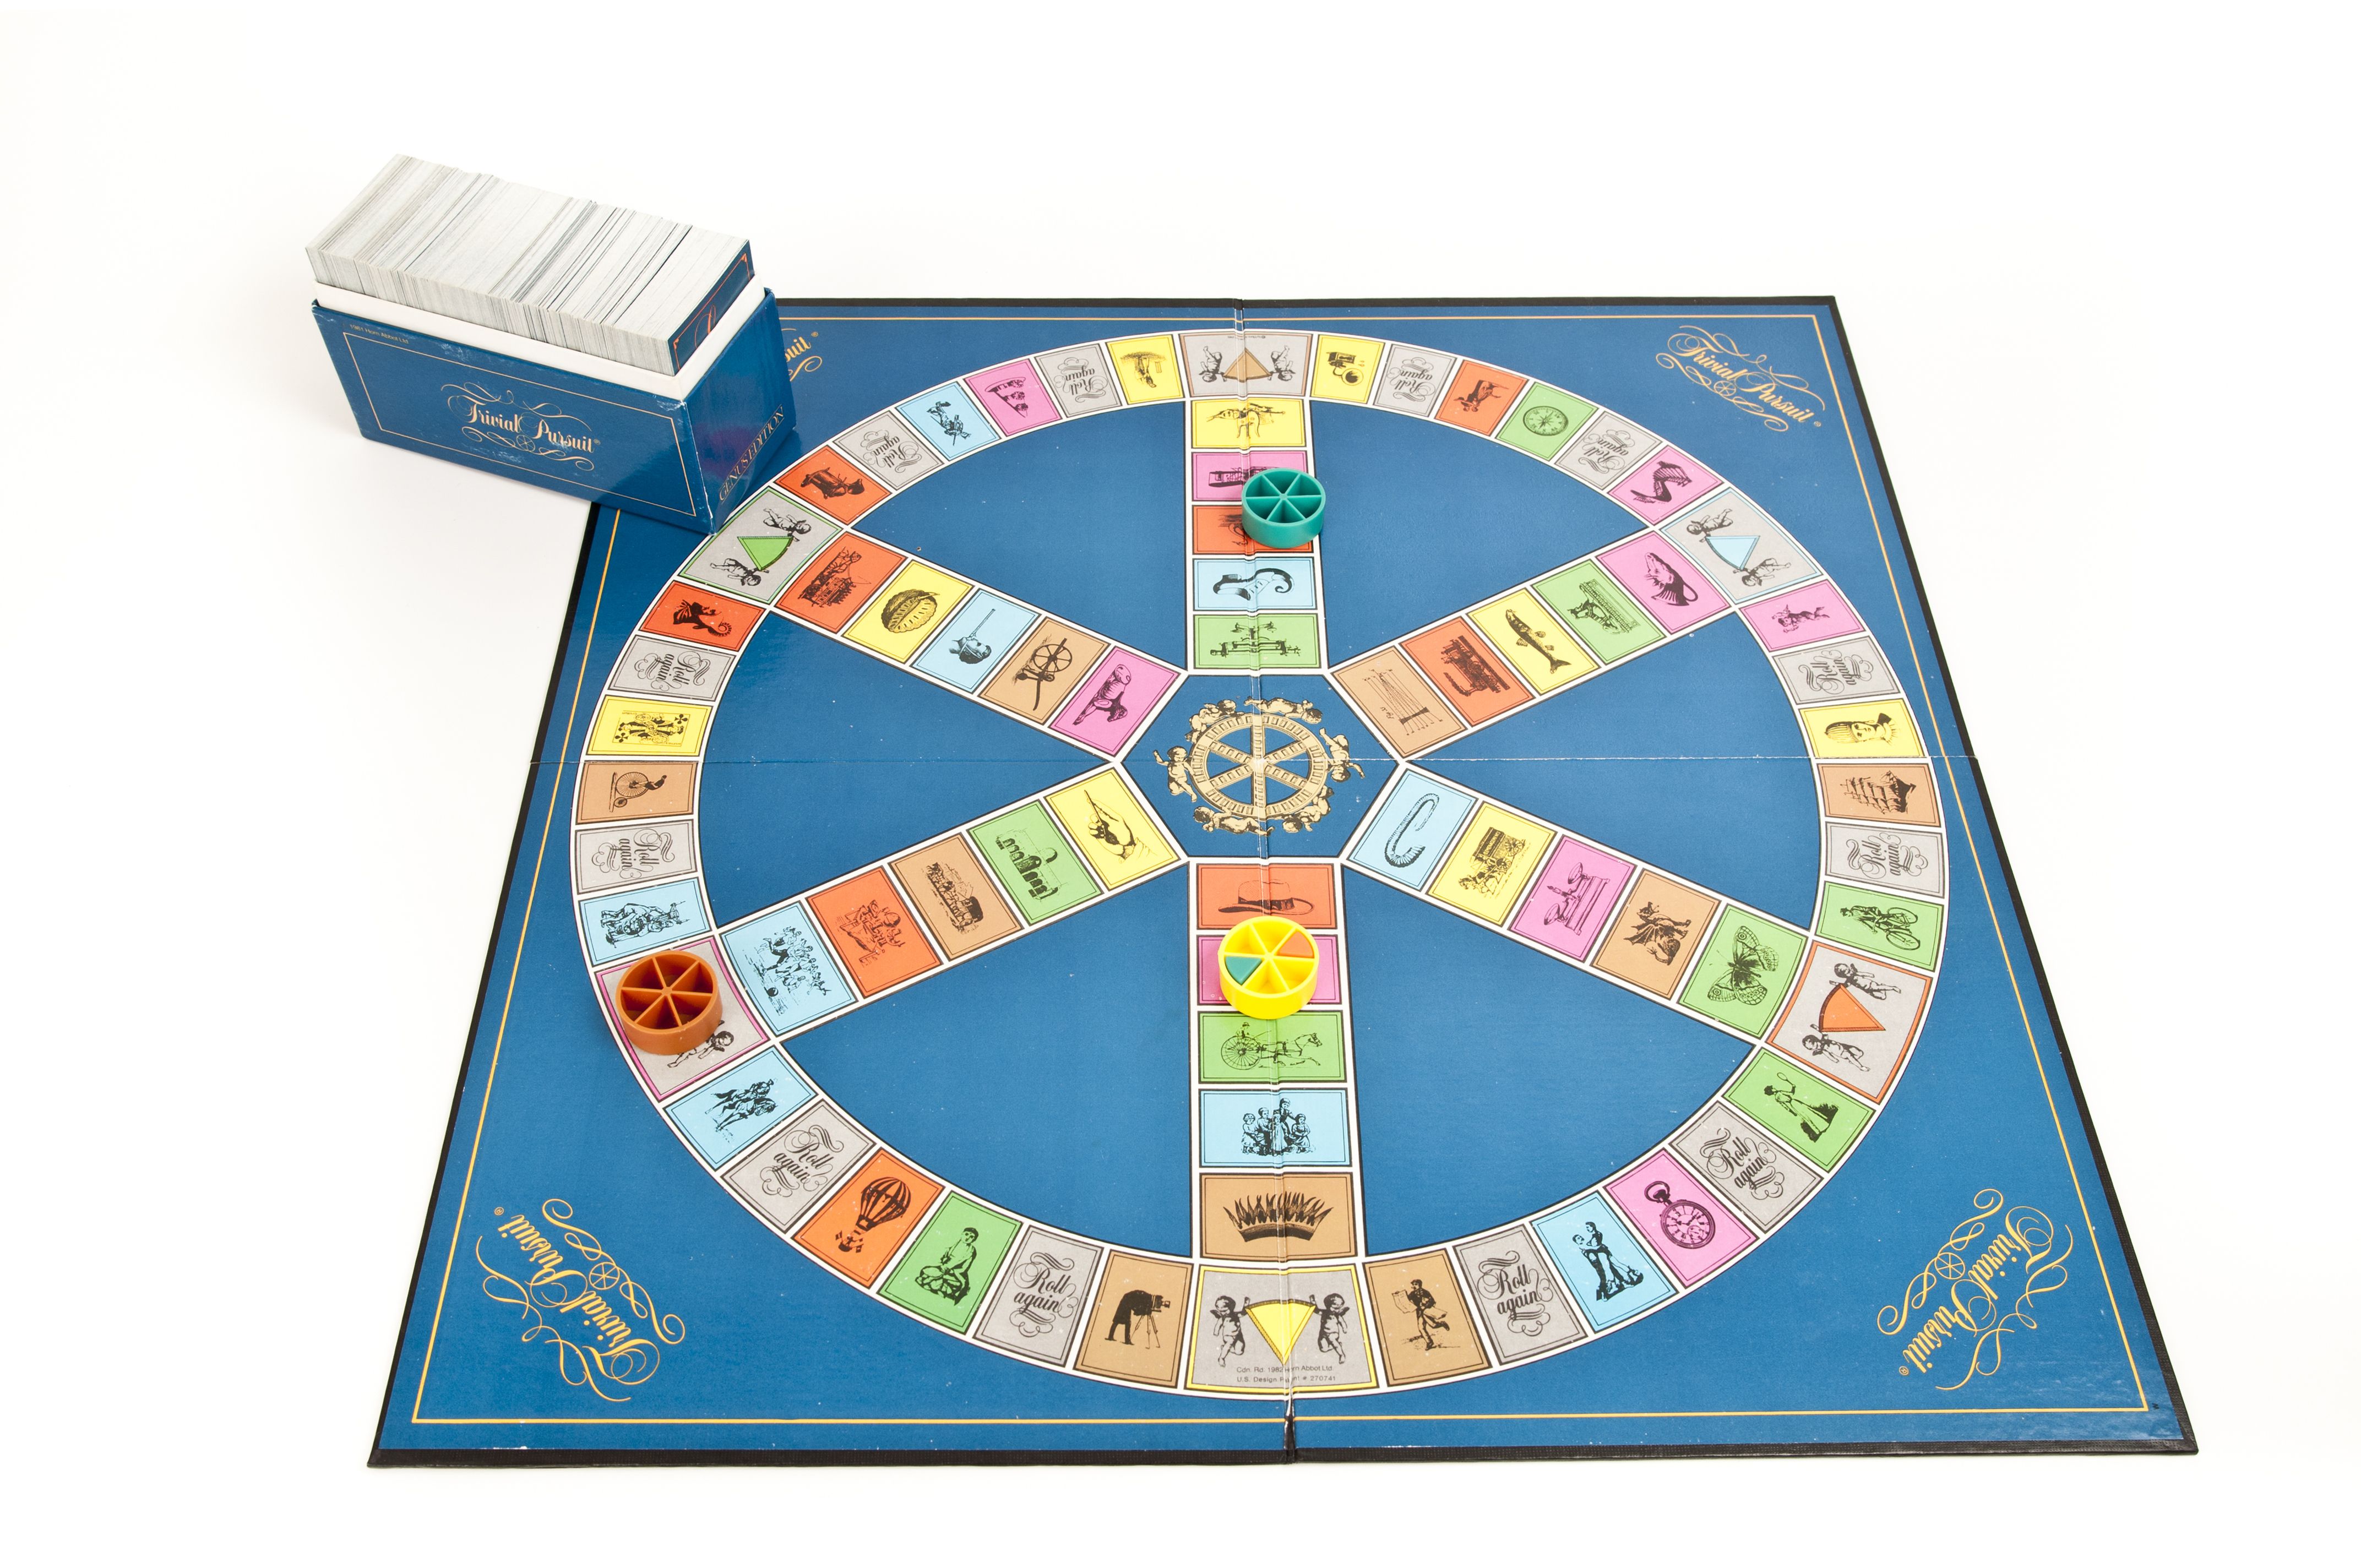 https://hips.hearstapps.com/hmg-prod/images/trivial-pursuit-game-board-with-card-box-and-player-royalty-free-image-1701083023.jpg